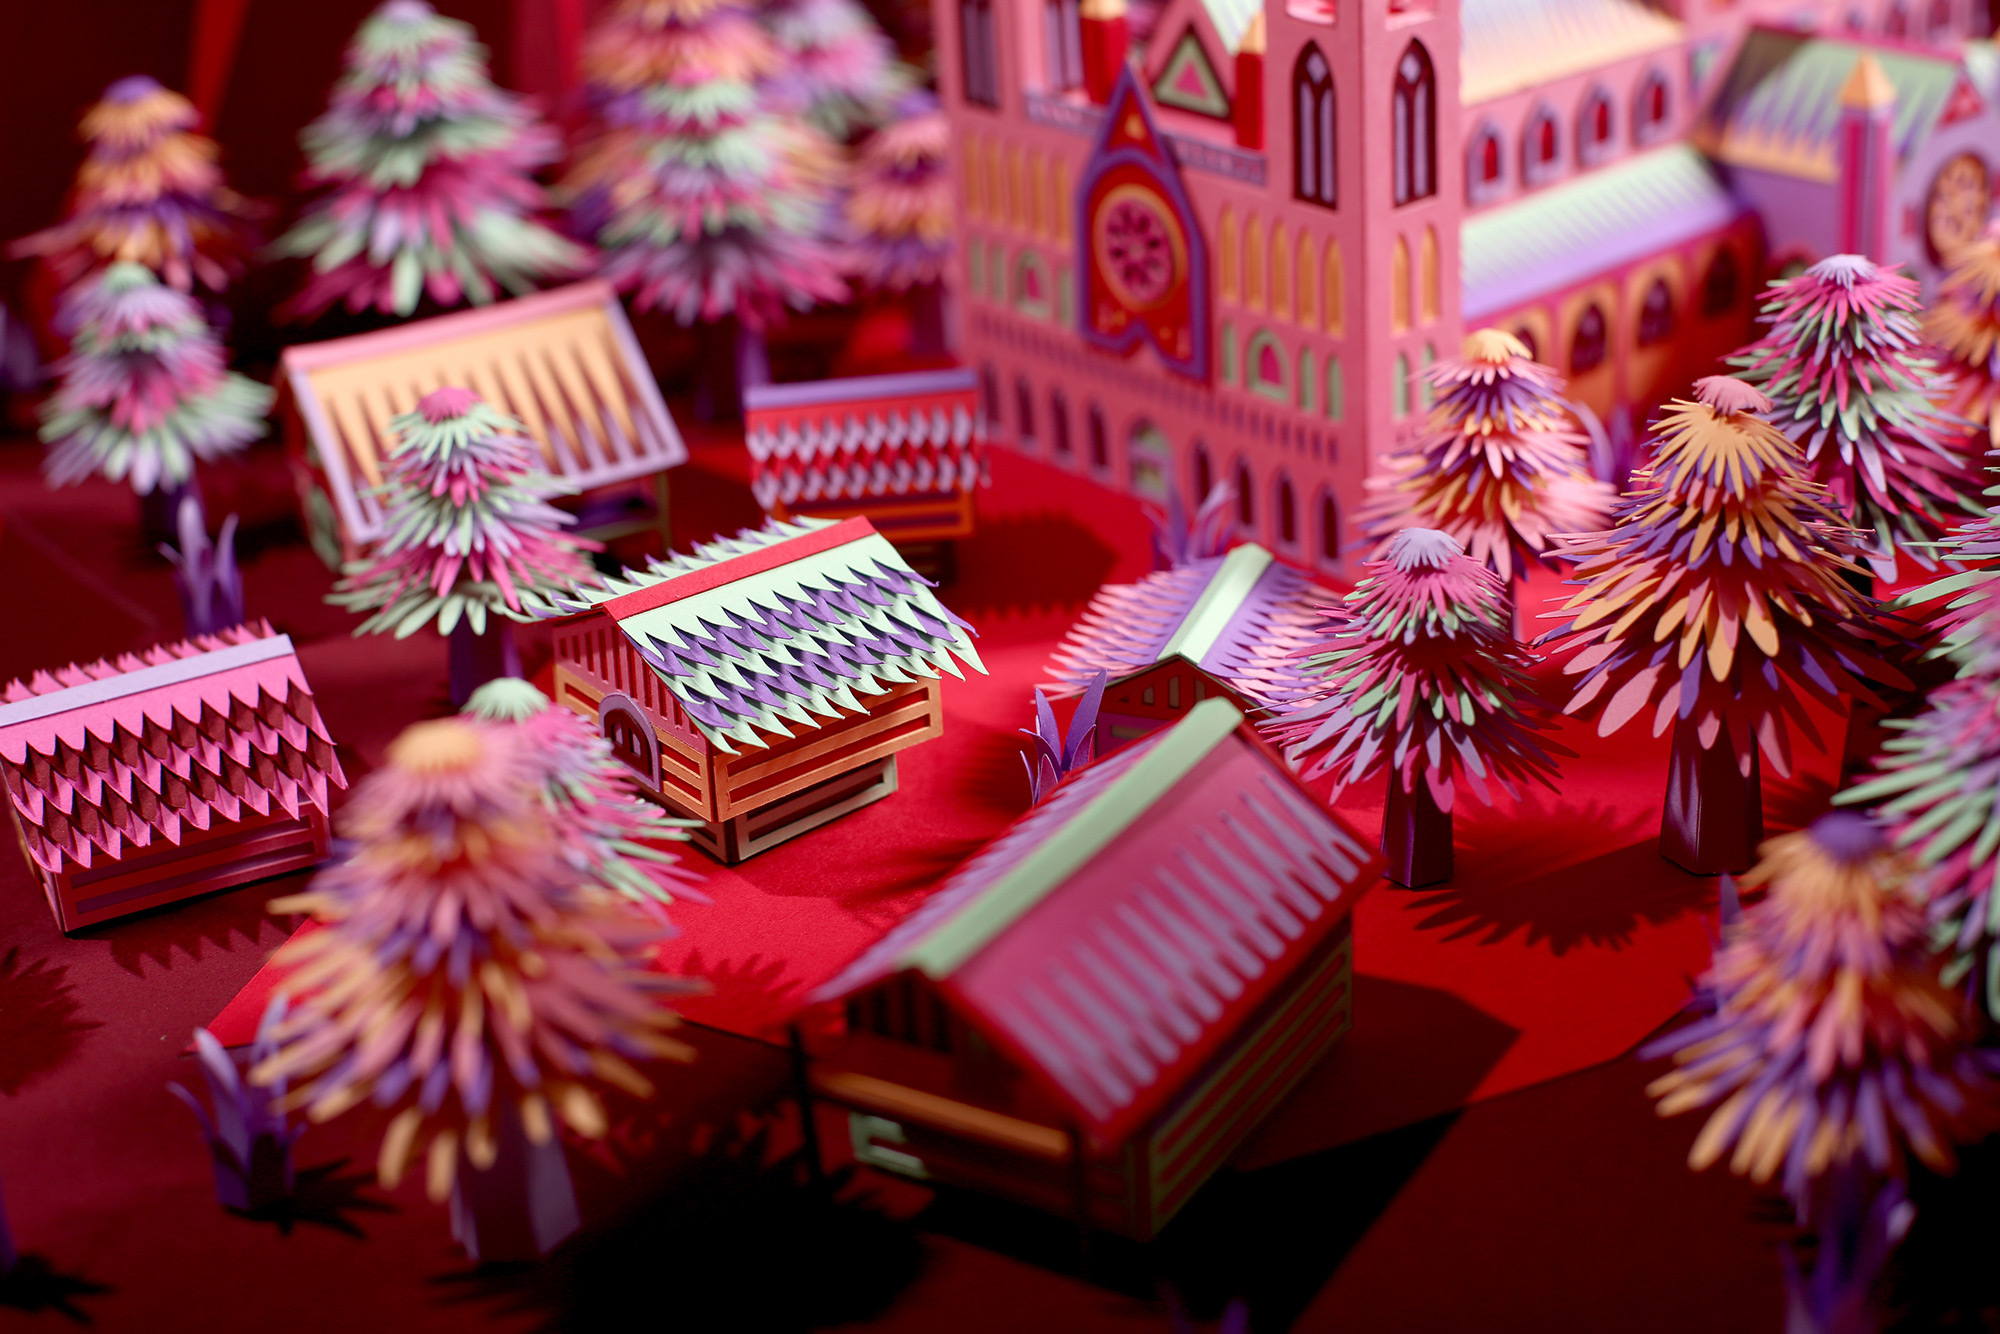 Scenes From Award-Winning Literature Crafted With Hand-Cut Paper by Zim &amp; Zou